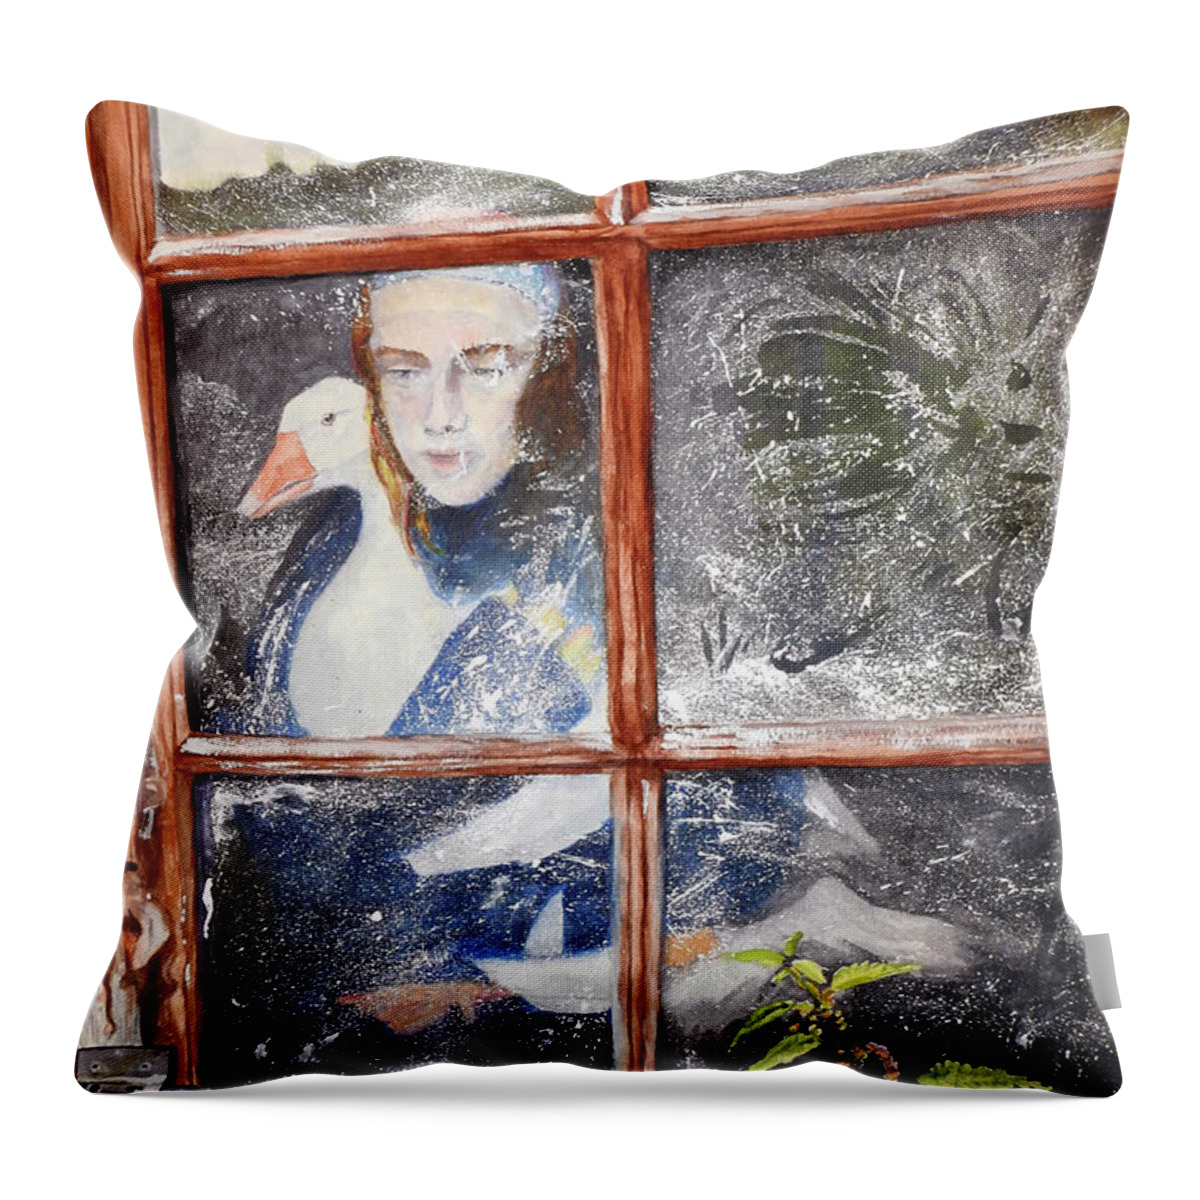 Goose Throw Pillow featuring the painting The Savior by Barbara F Johnson